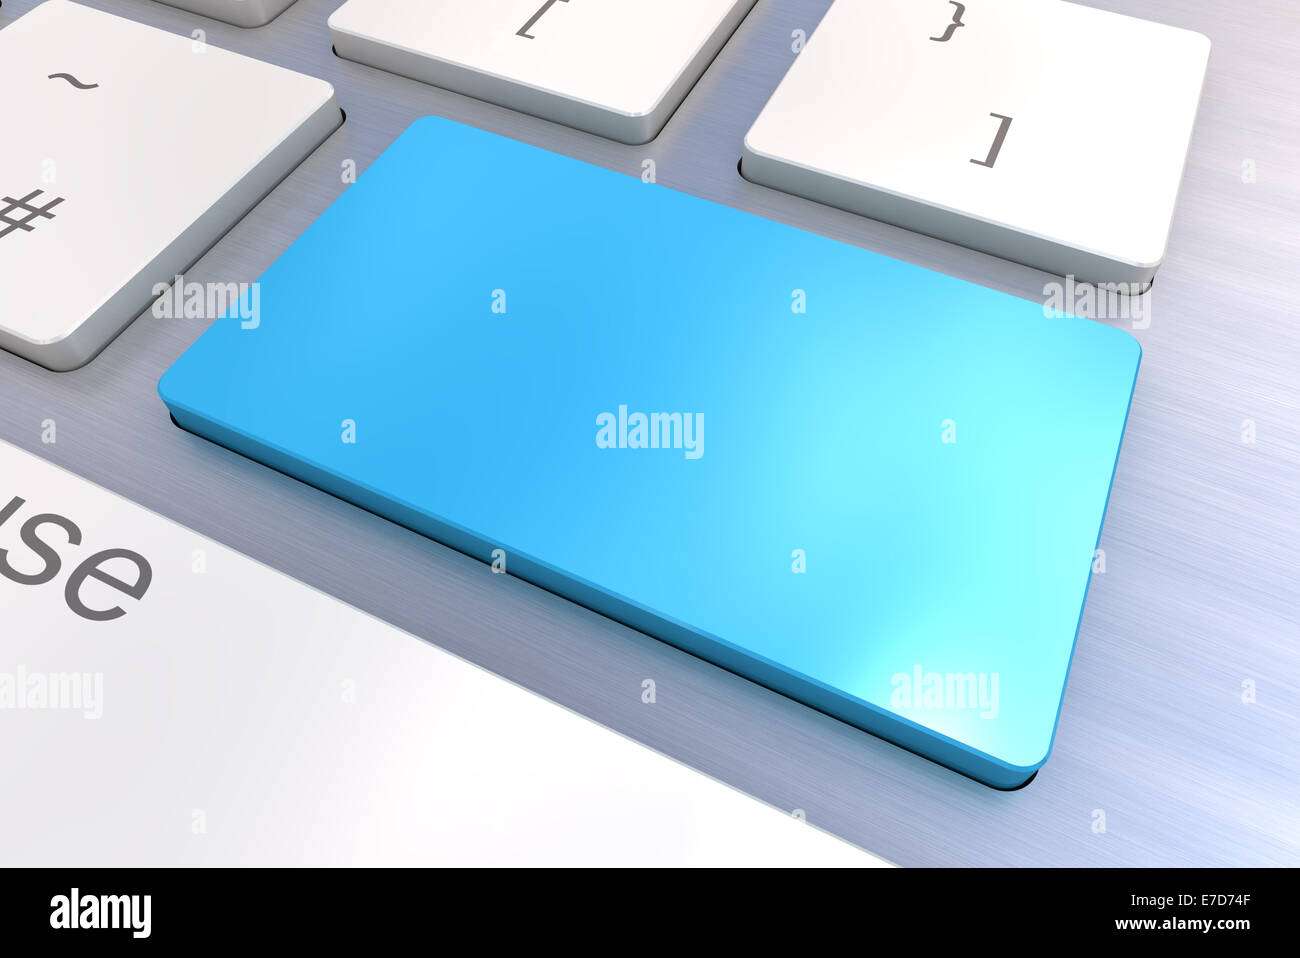 A Colourful 3d Rendered Illustration showing a Blank Blue Keyboard concept on a Computer Keyboard Stock Photo